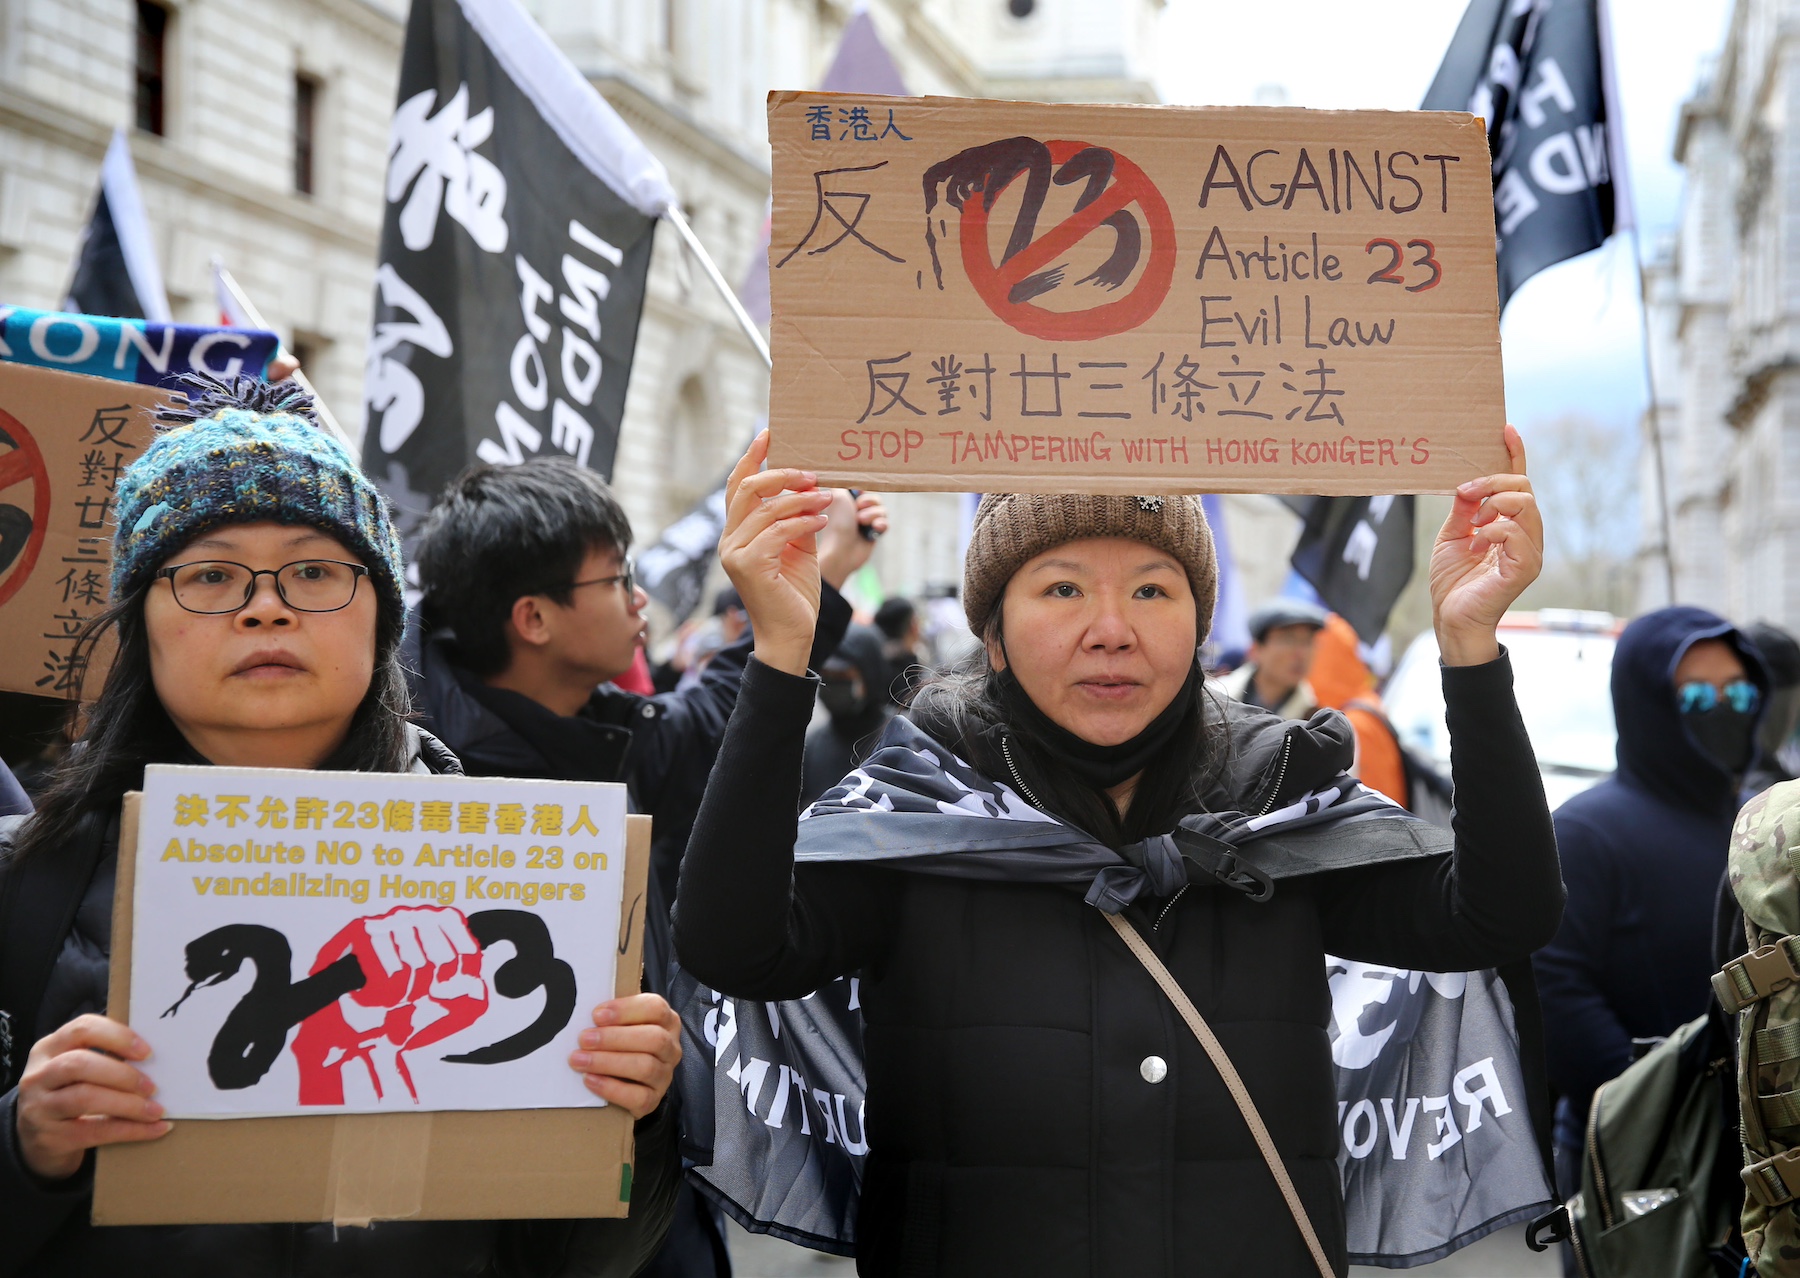 protesters signs against article 23 hong kong